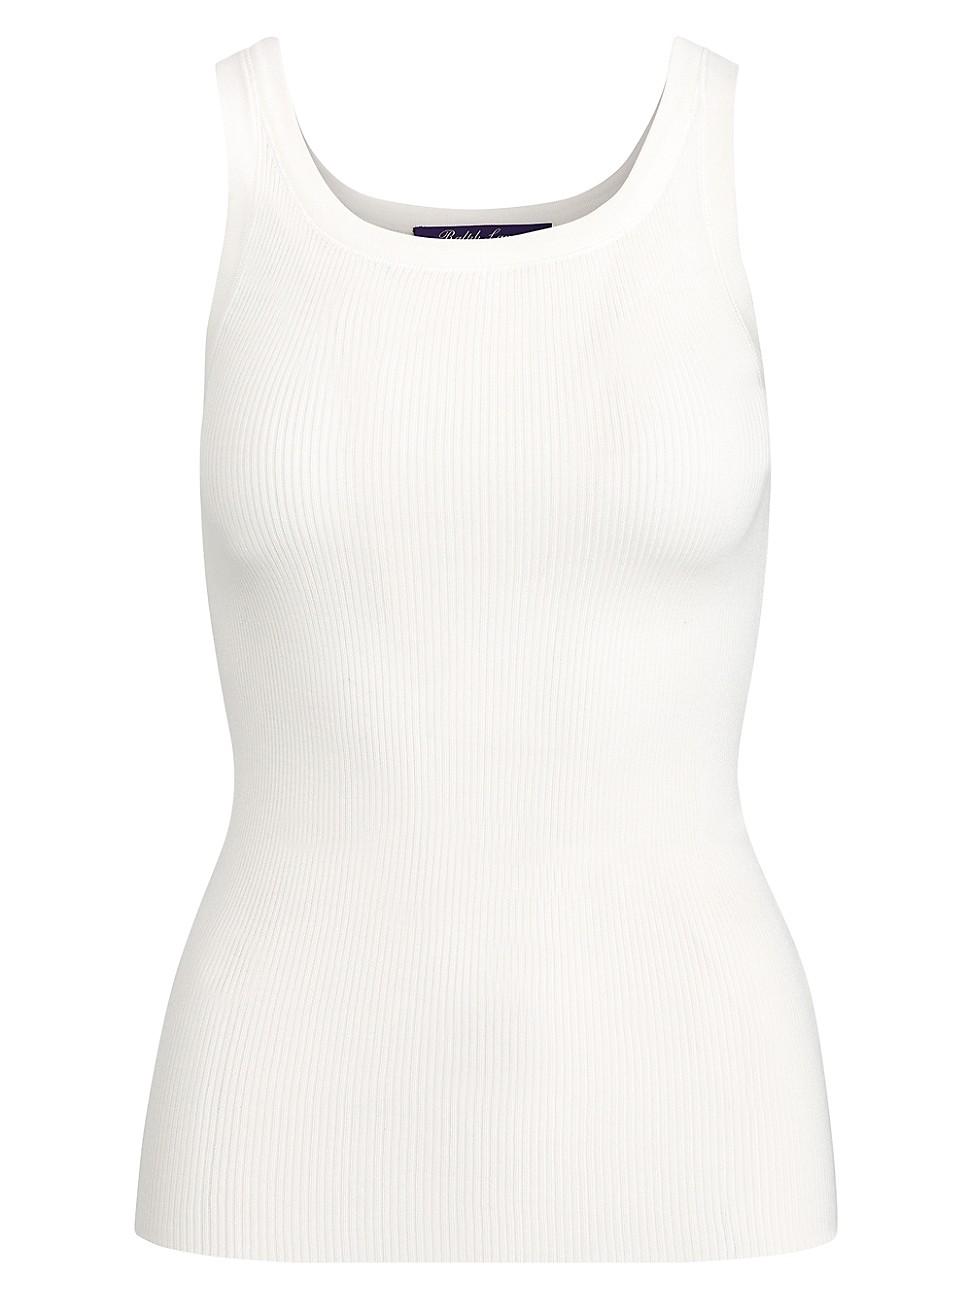 Ralph Lauren Collection Silk Ribbed Tank Top in White - Lyst